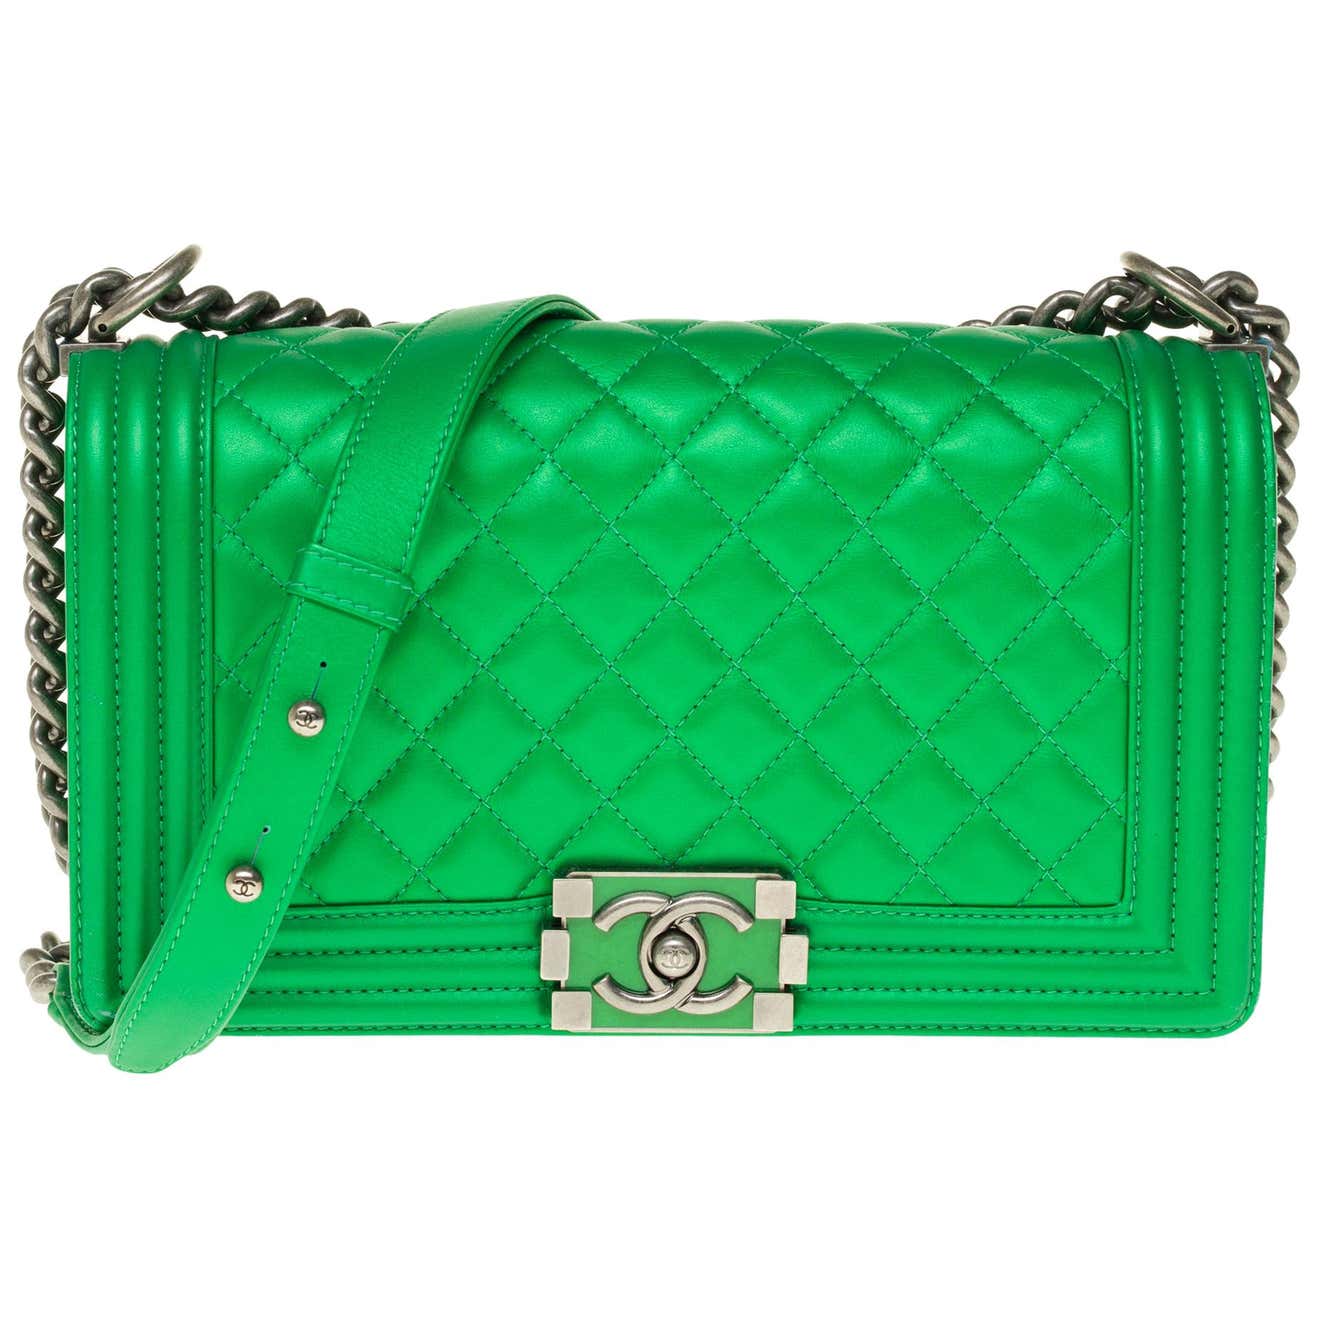 LIMITED EDITION Chanel Boy Old medium handbag in green quilted leather ...